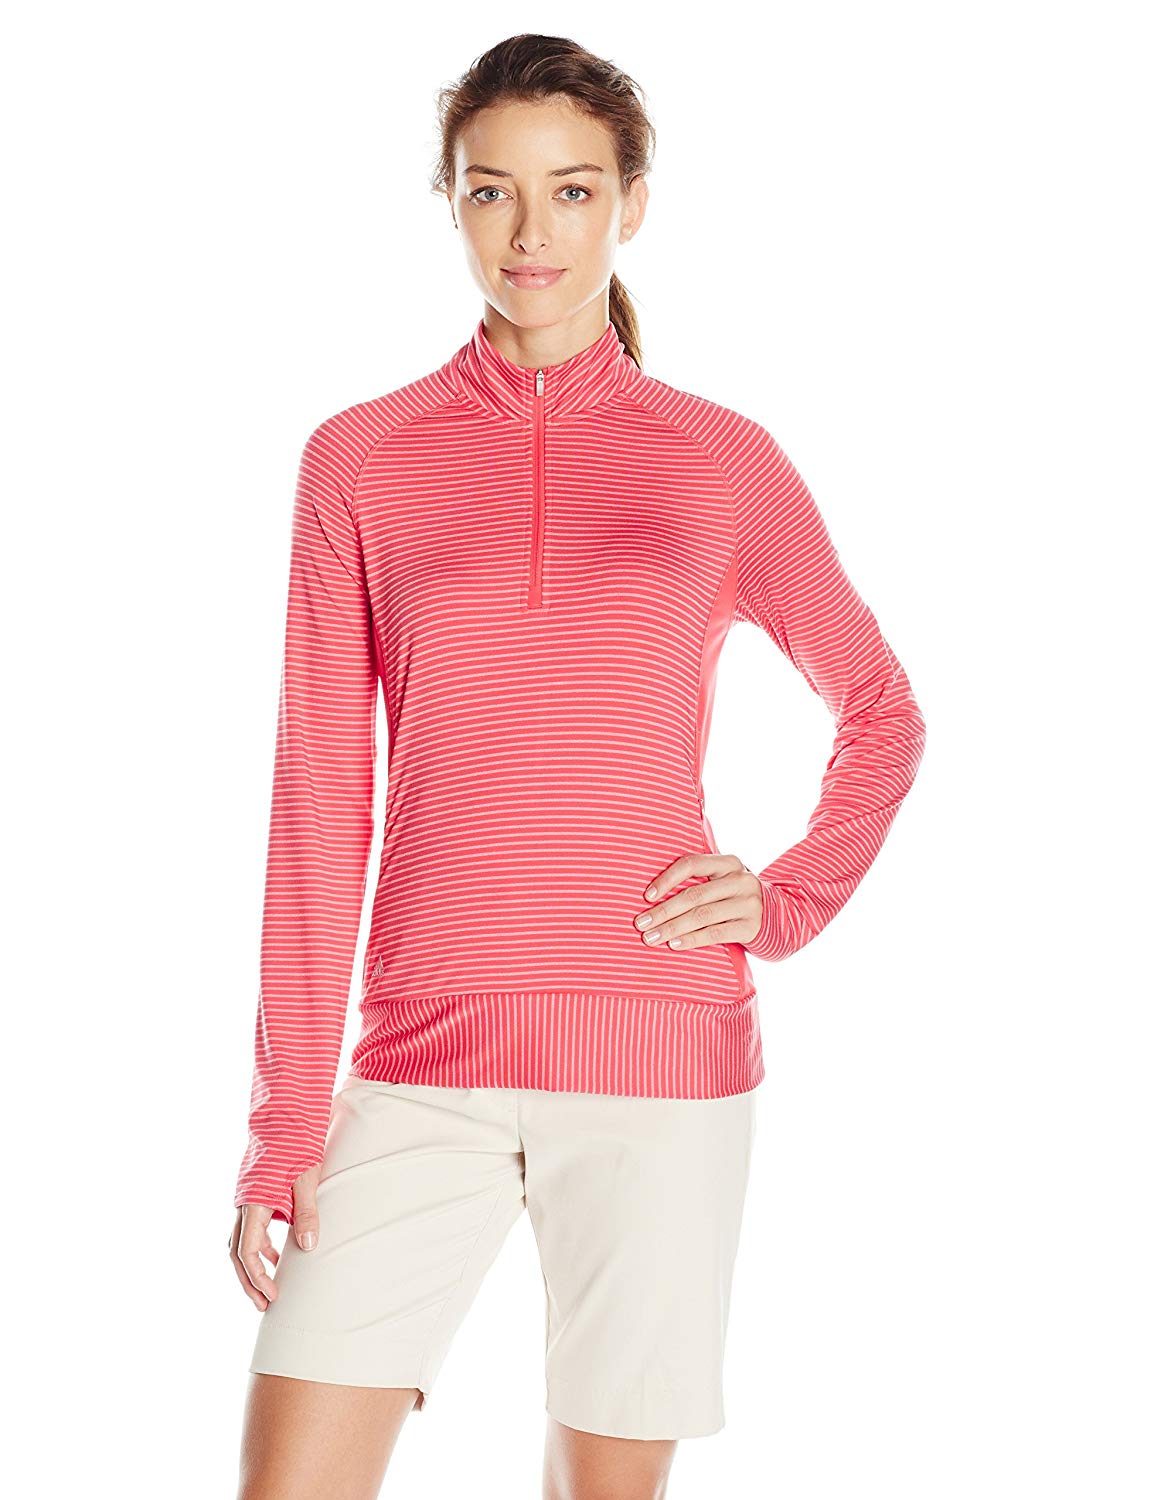 Buy Adidas Womens Golf Jackets for Best Prices Online!